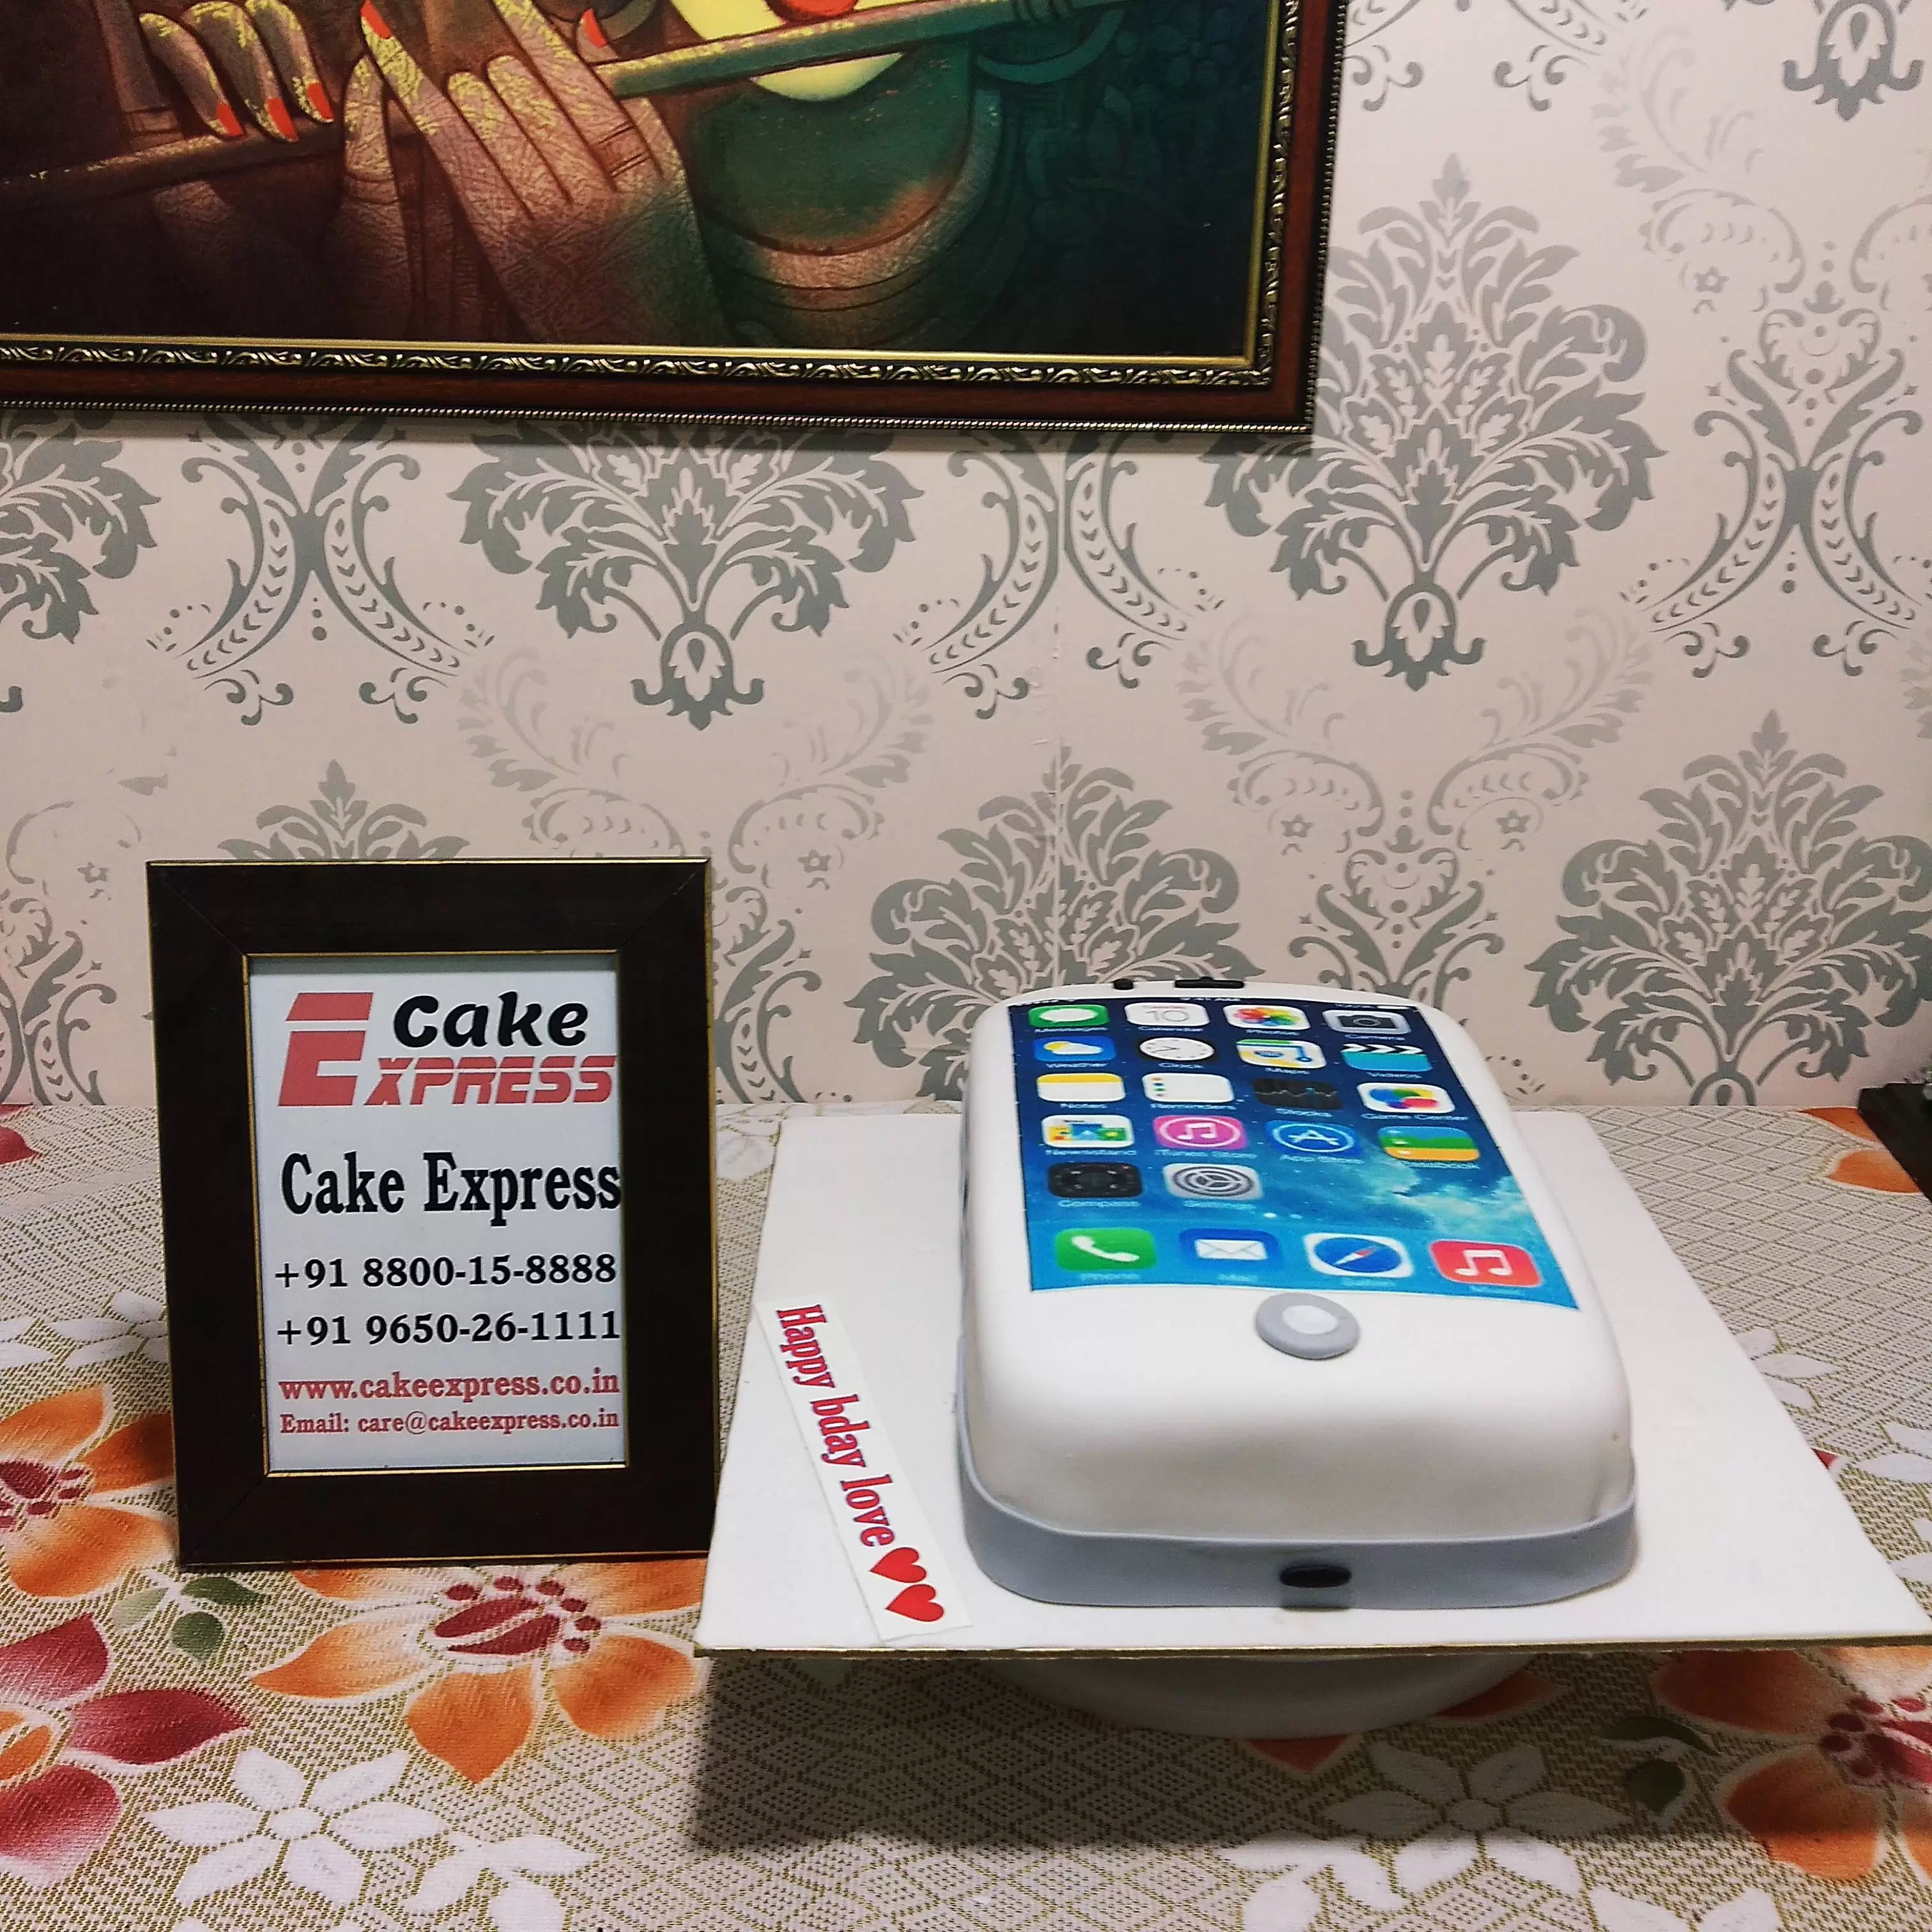 Phone Shape Cake: A Unique and Delicious Cake to Pakistan